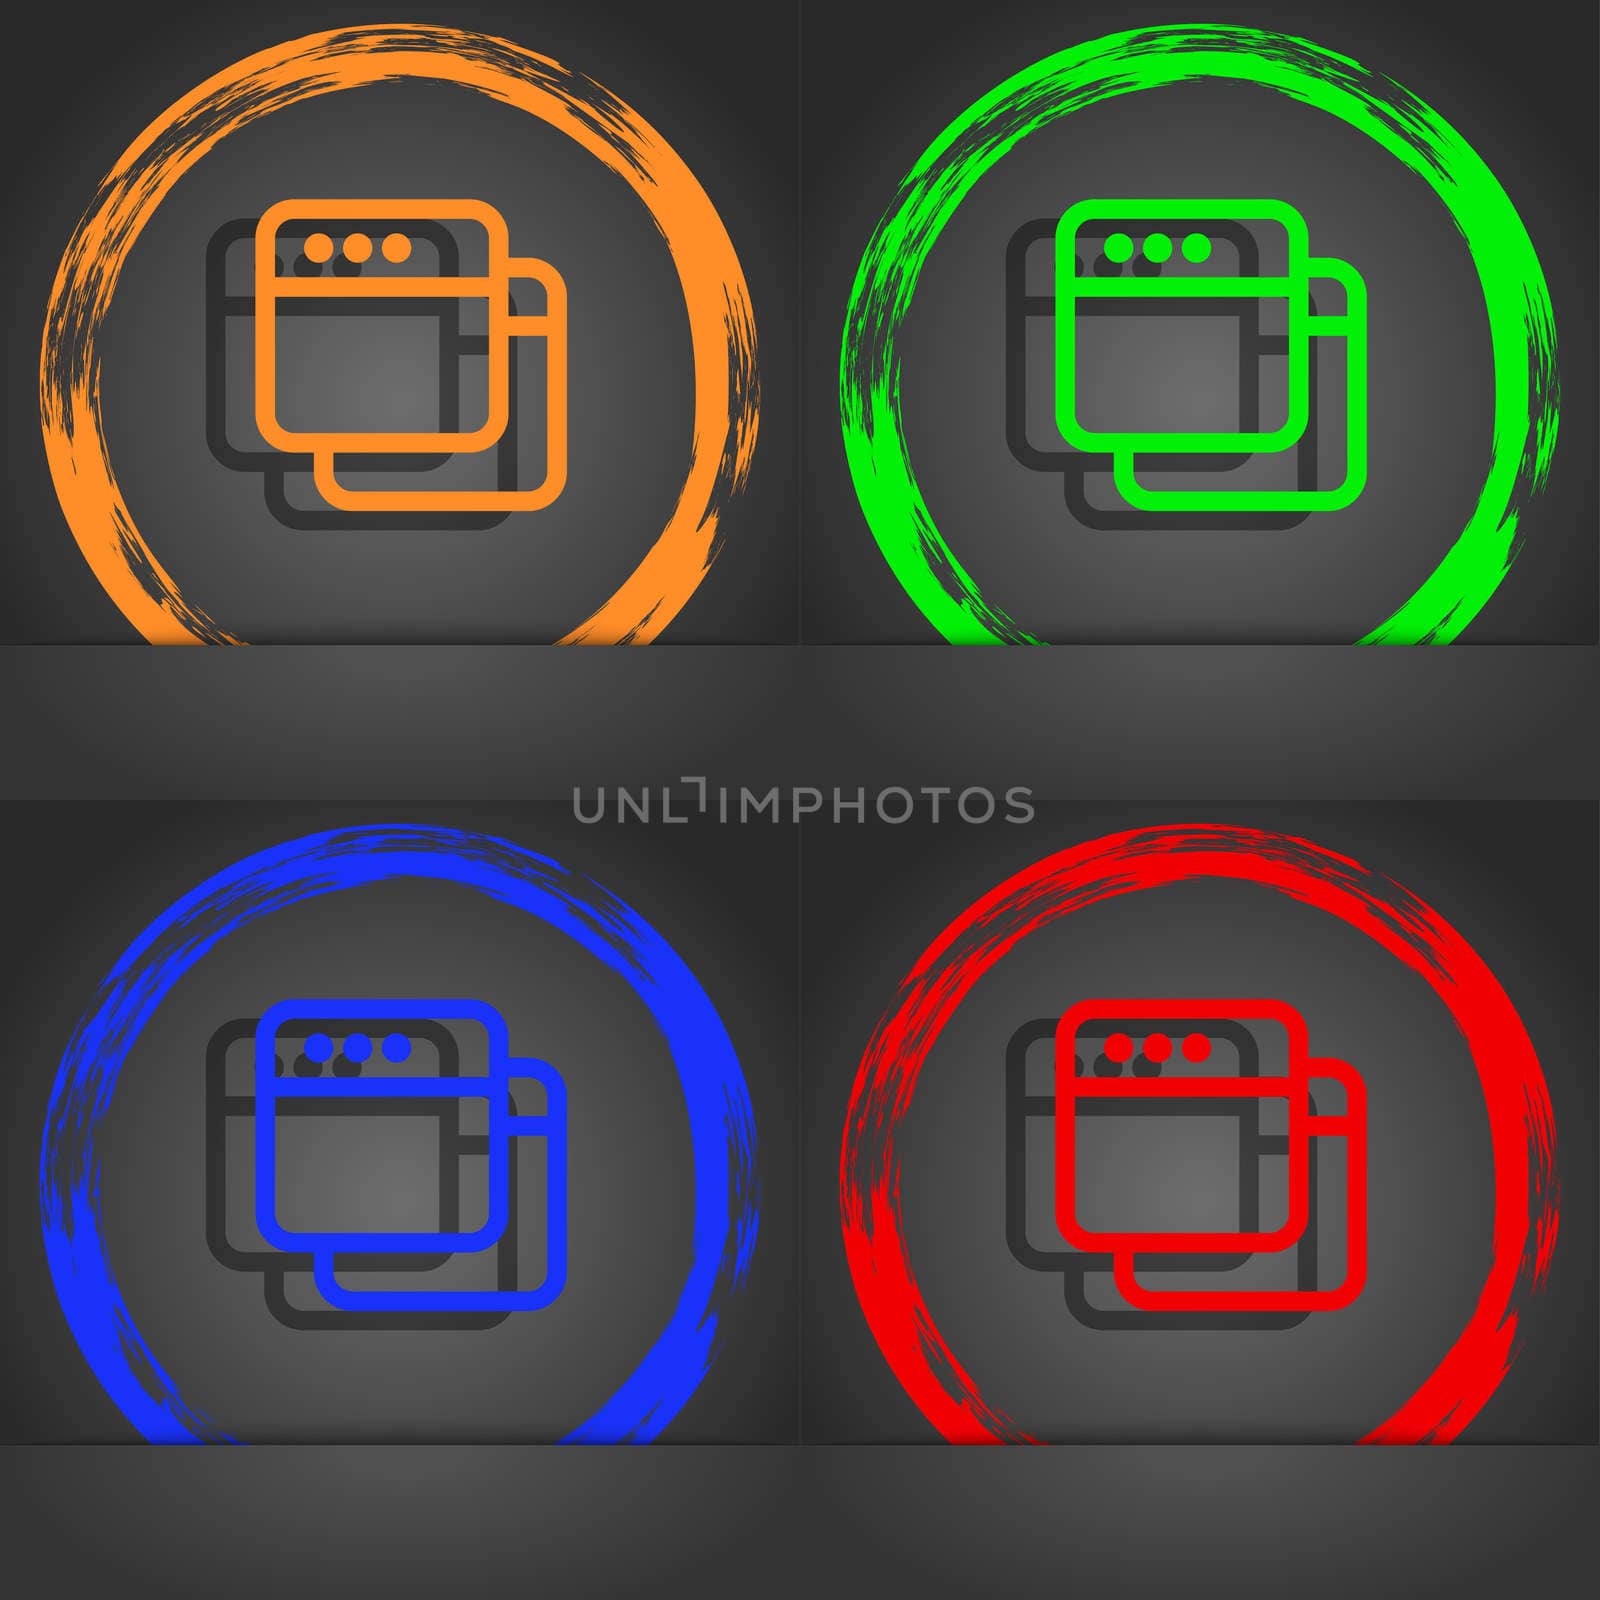 Simple Browser window icon symbol. Fashionable modern style. In the orange, green, blue, green design. illustration